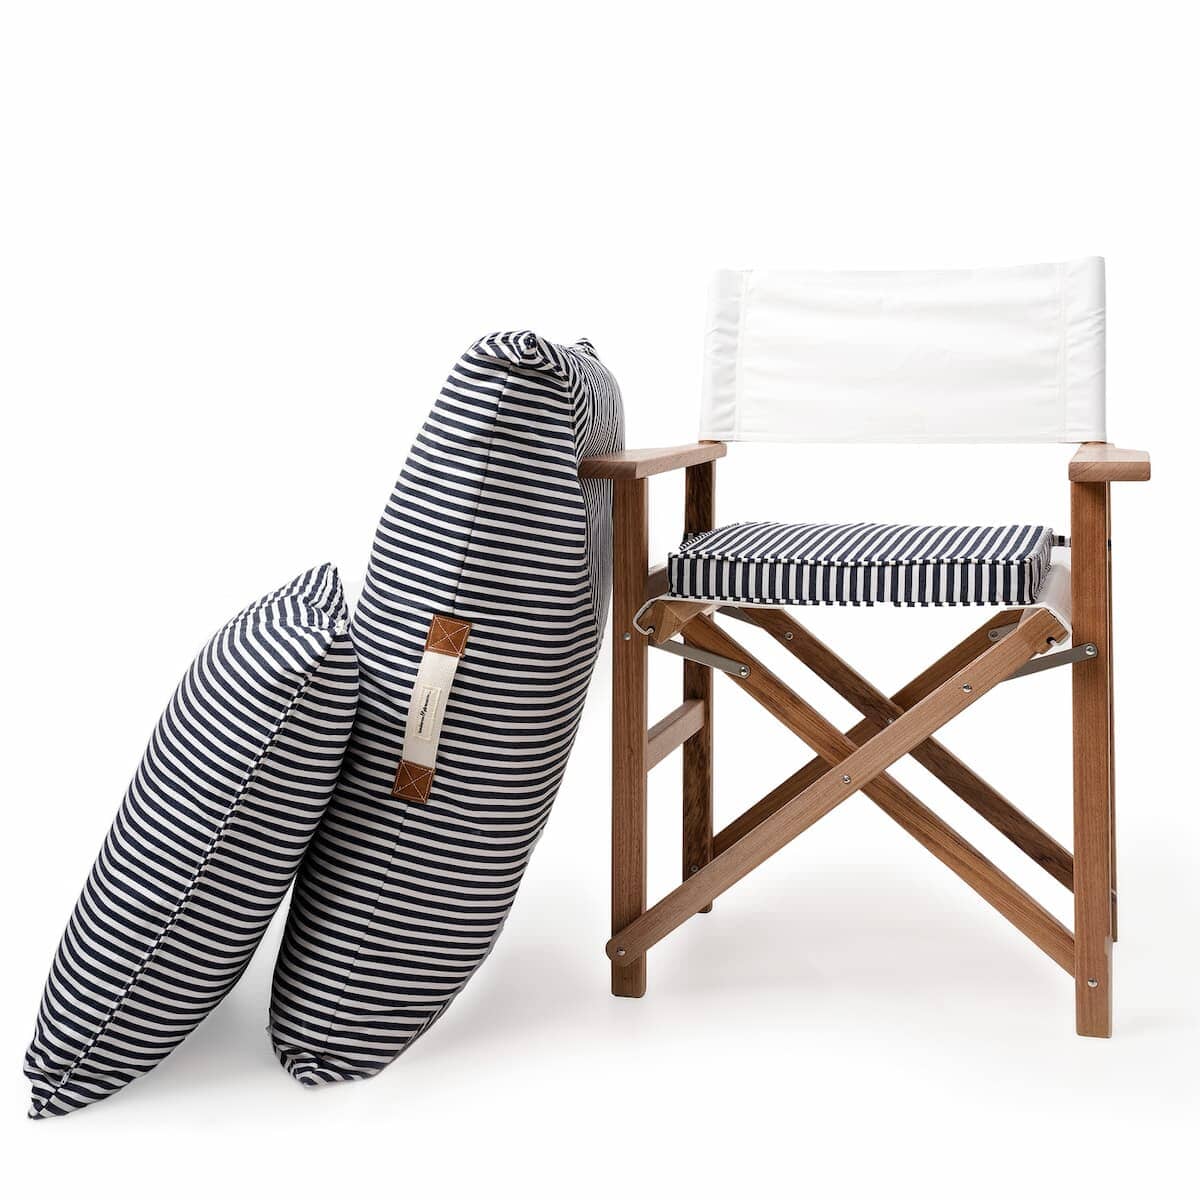 studio image of floor pillow and throw pillow leaning up against a directors chair